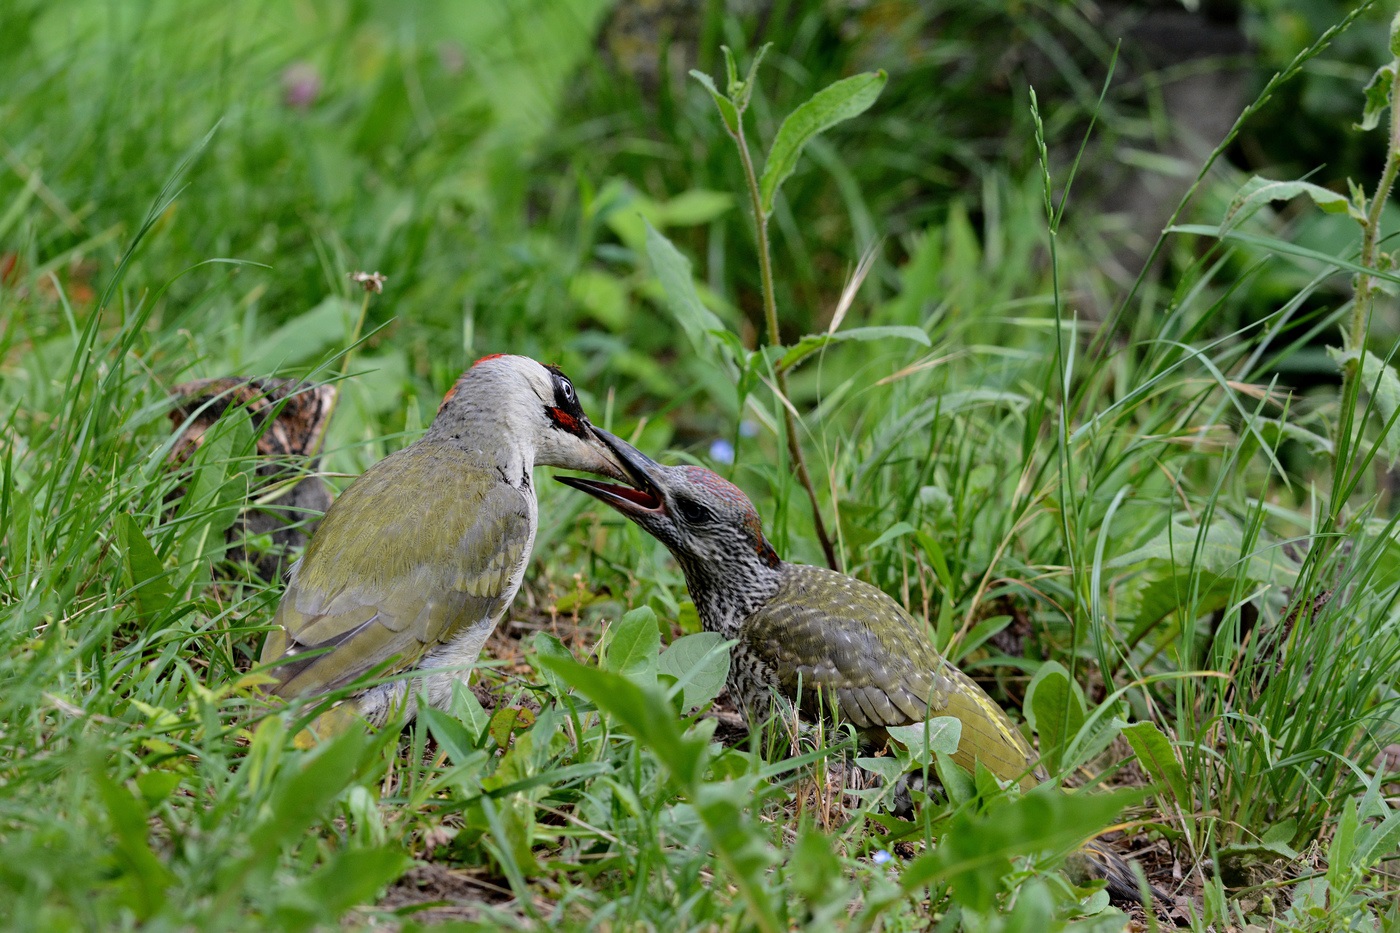 The green woodpecker fled from the nest, but still needs the support of parents